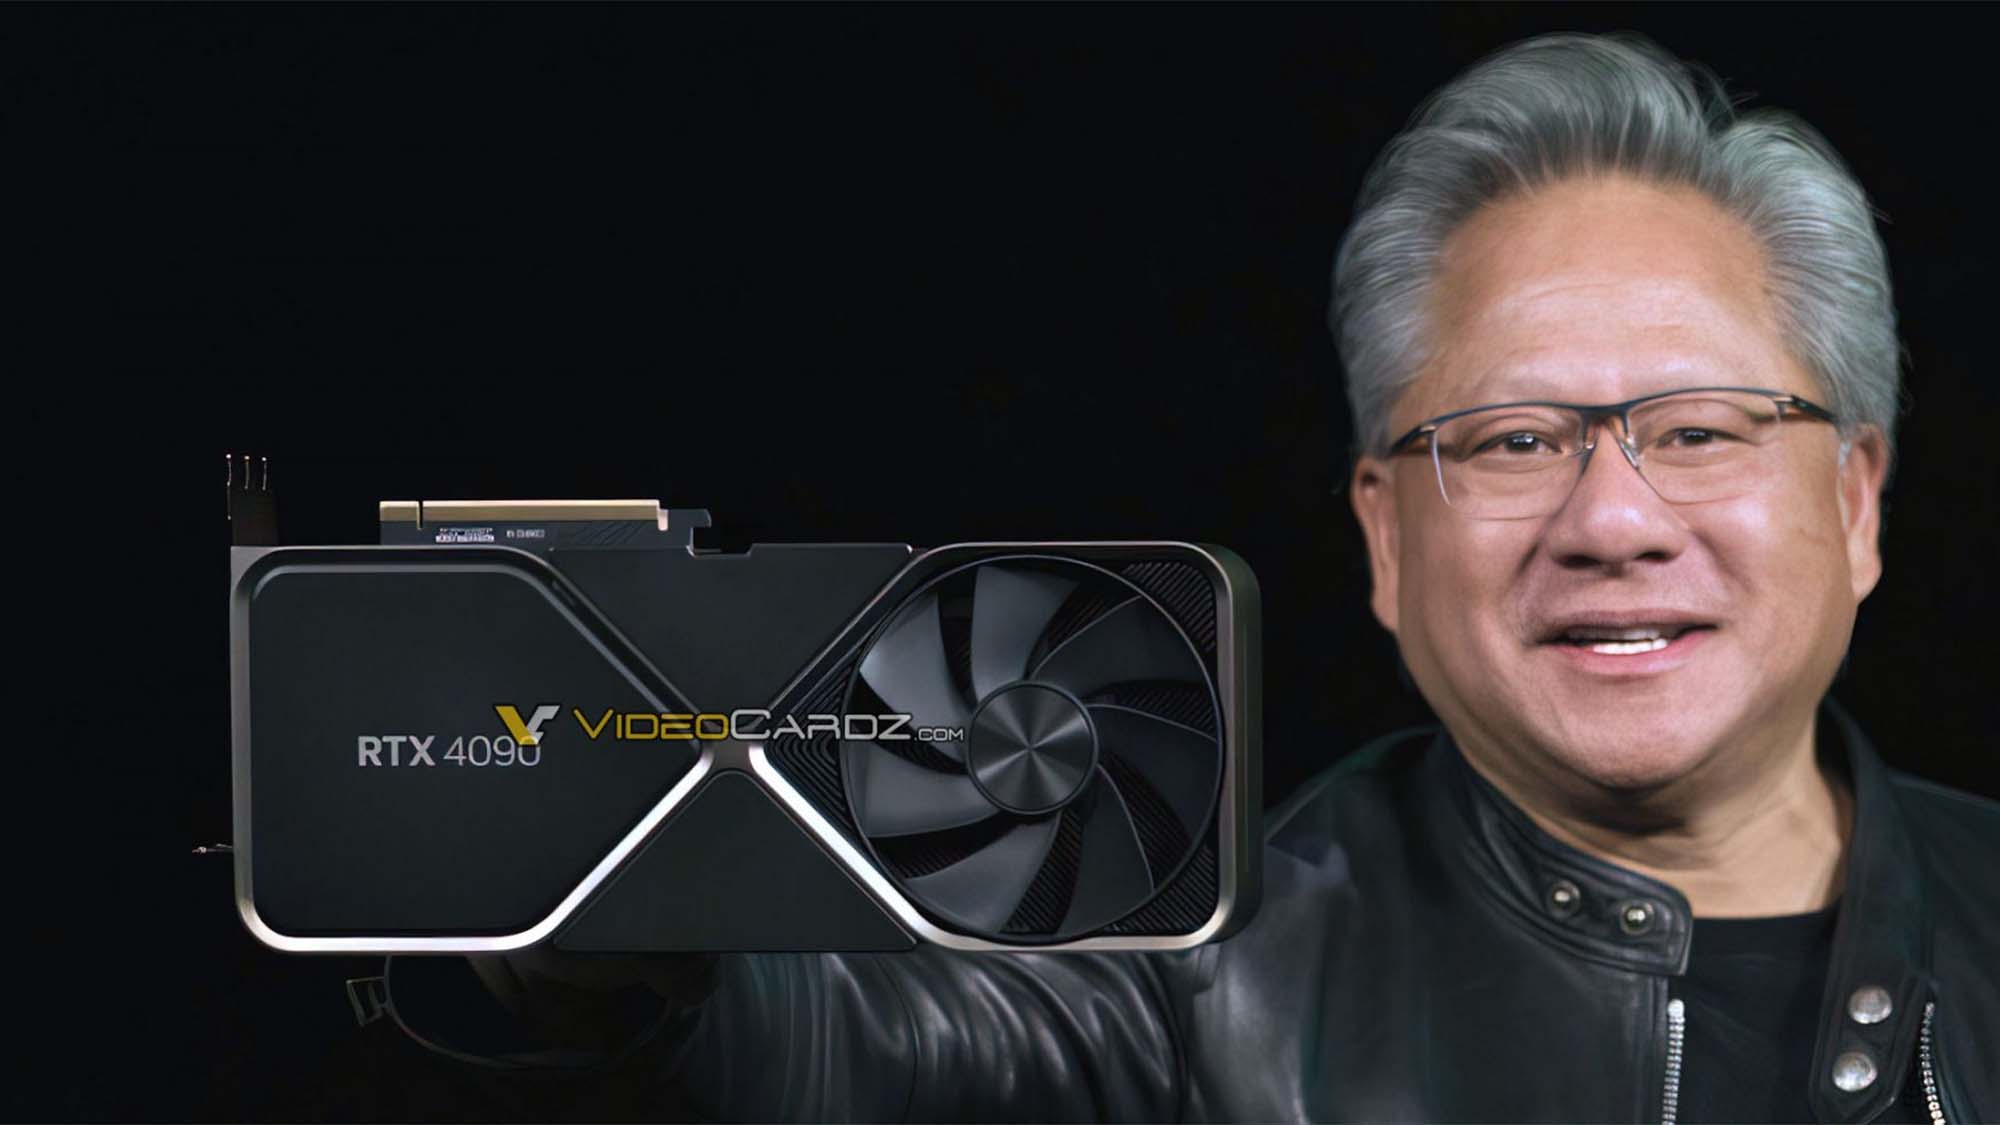 Jensen Huang reportedly holding the RTX 4090 against a black backdrop